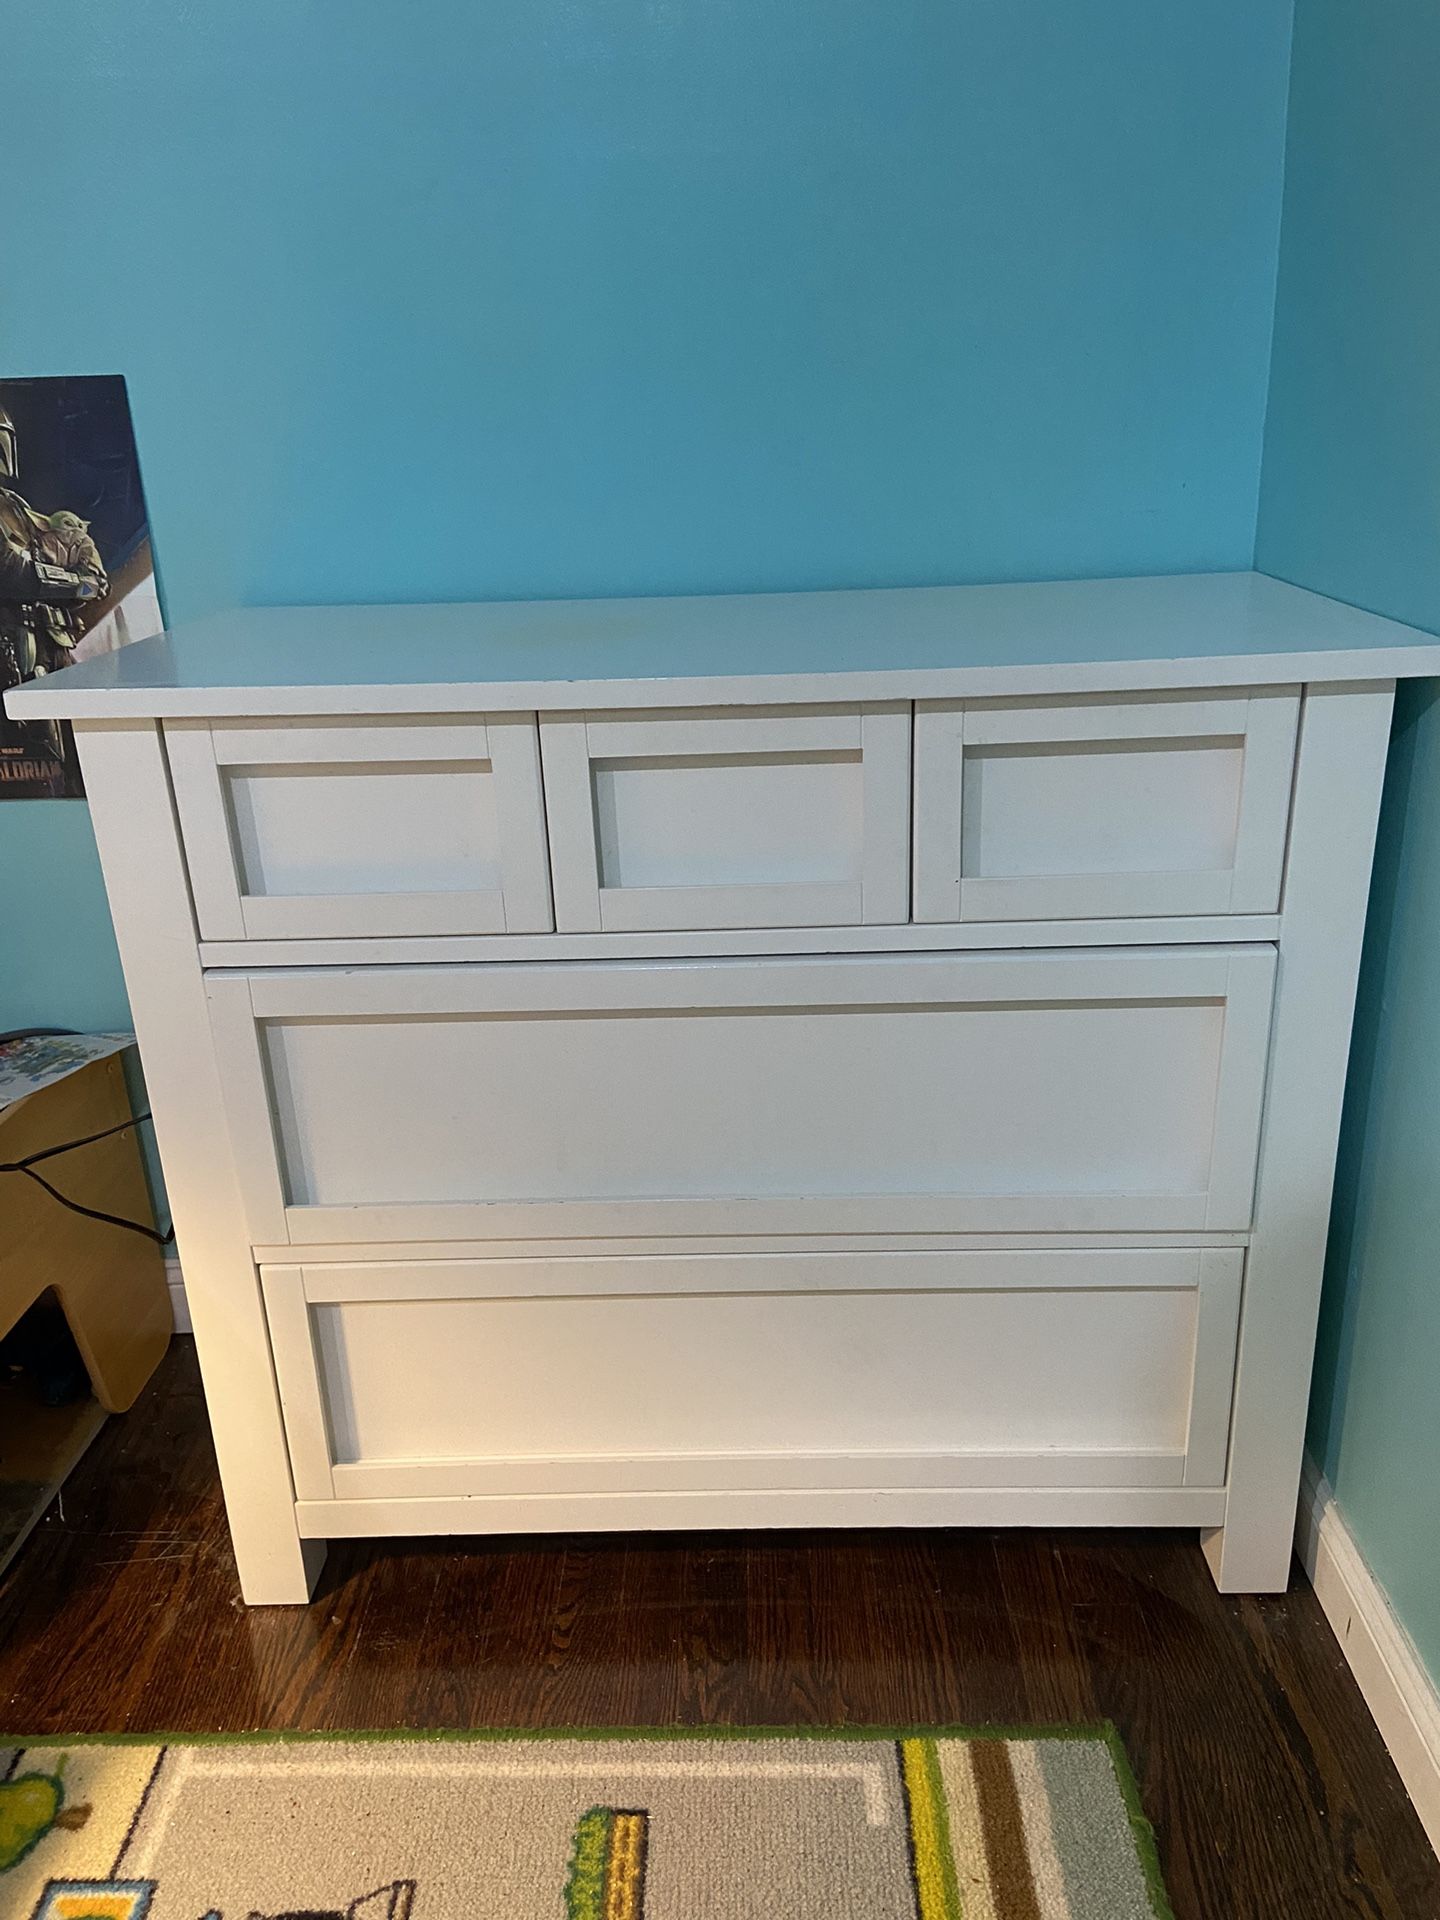 Potterybarn Kids Dresser With Changing Pad Topper (not Shown)